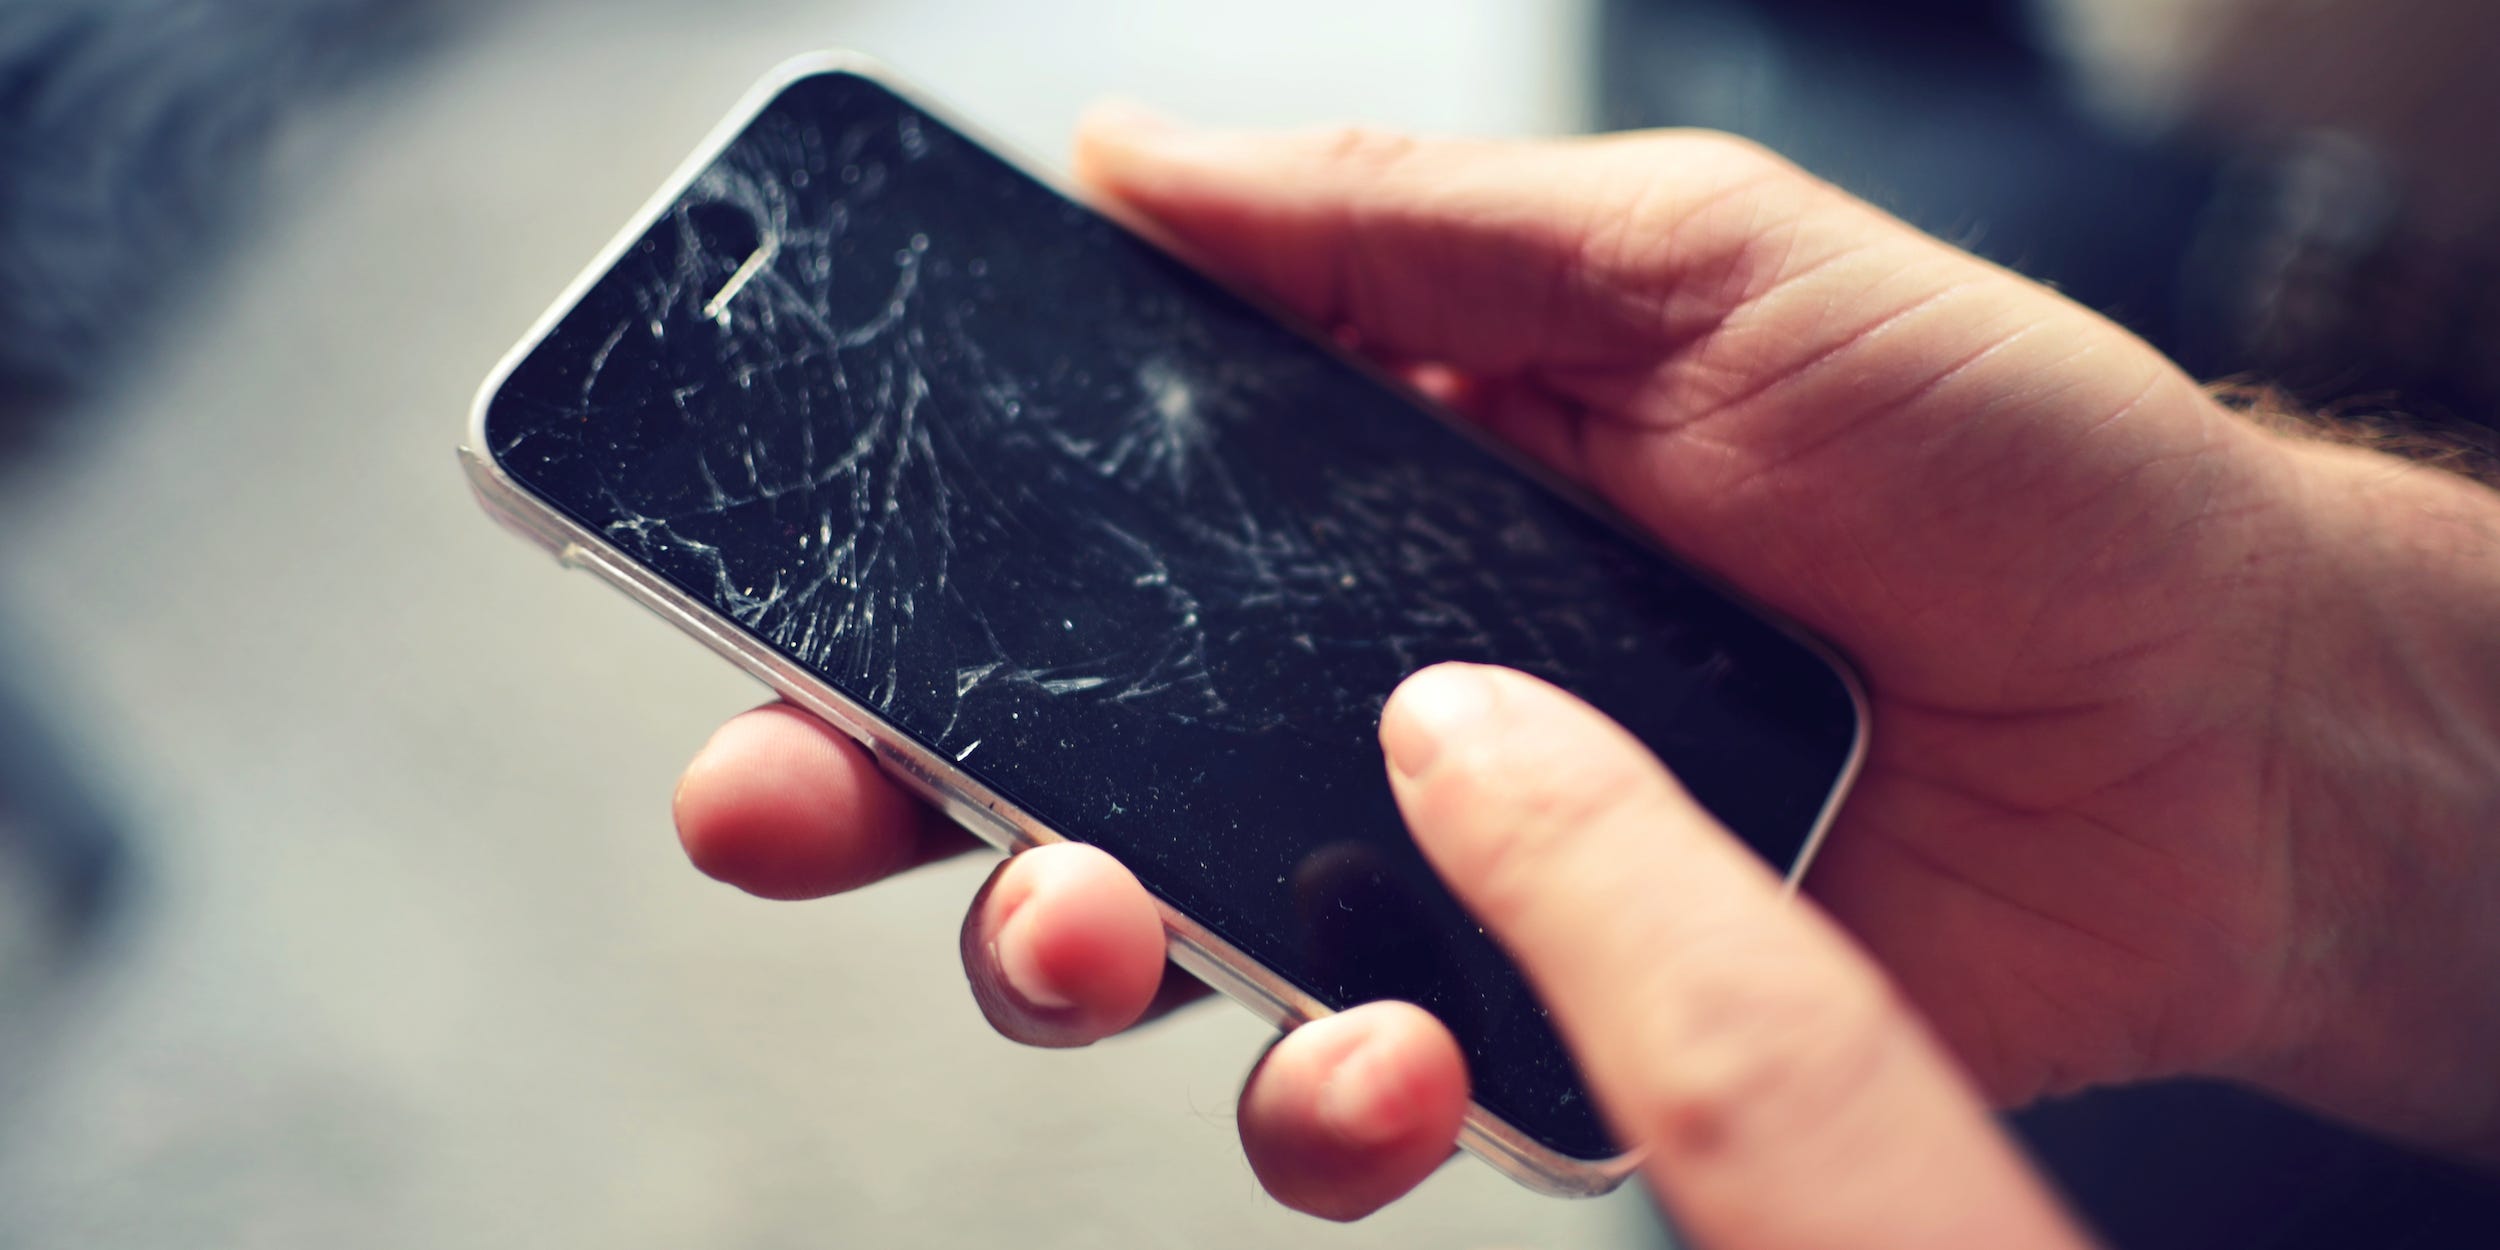 hands touching a smartphone with a broken cracked screen